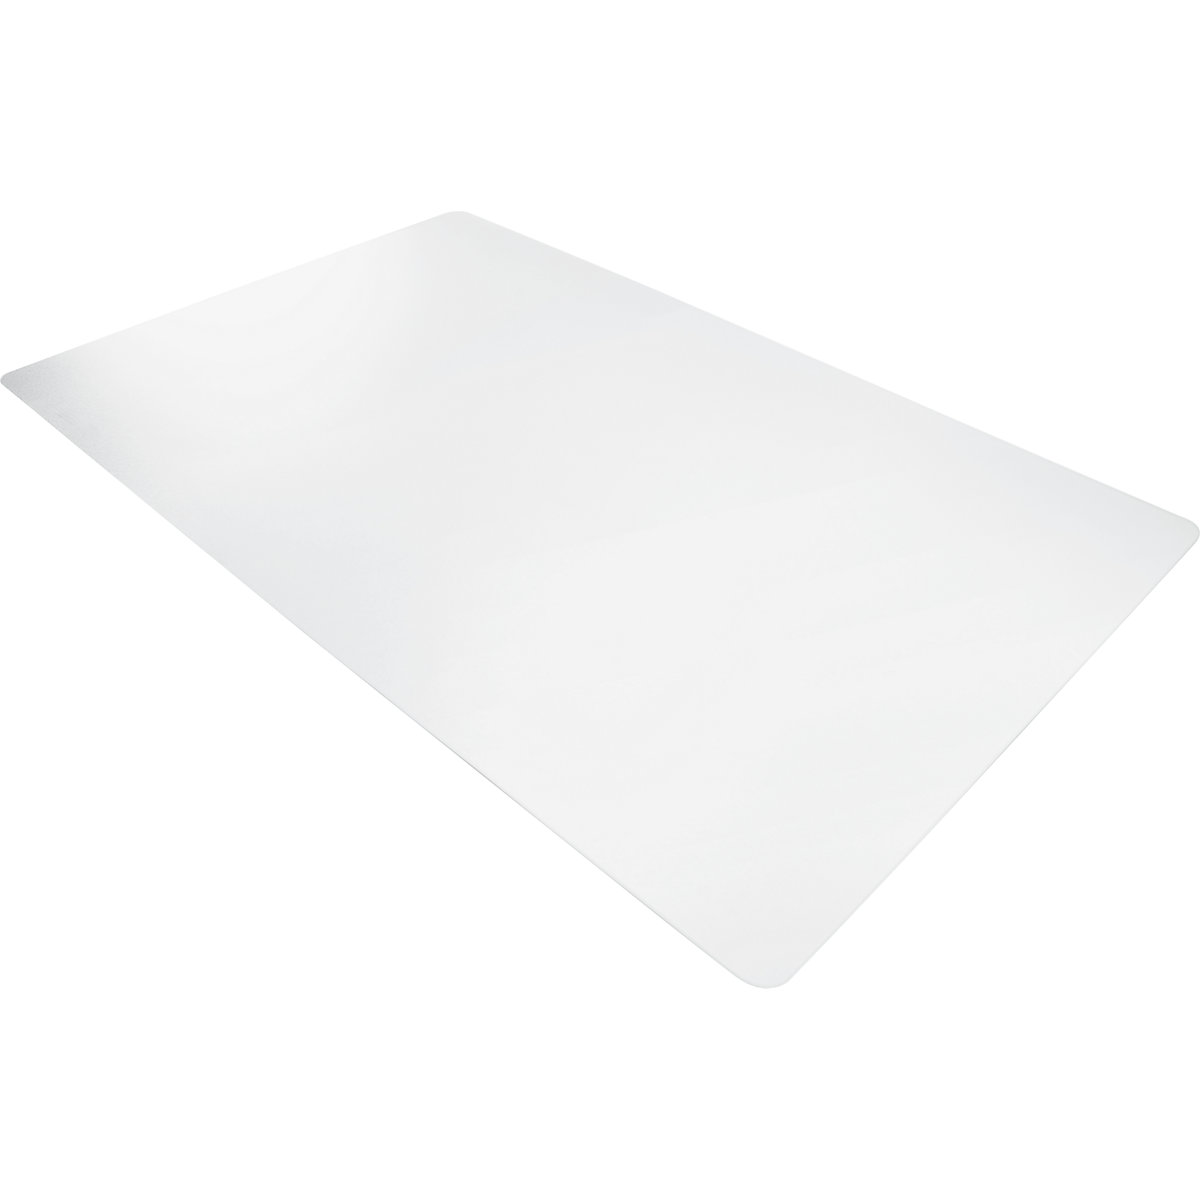 Floor protection mat ECOGRIP SOLID, for smooth and hard floors, WxD 1800 x 1200 mm-5